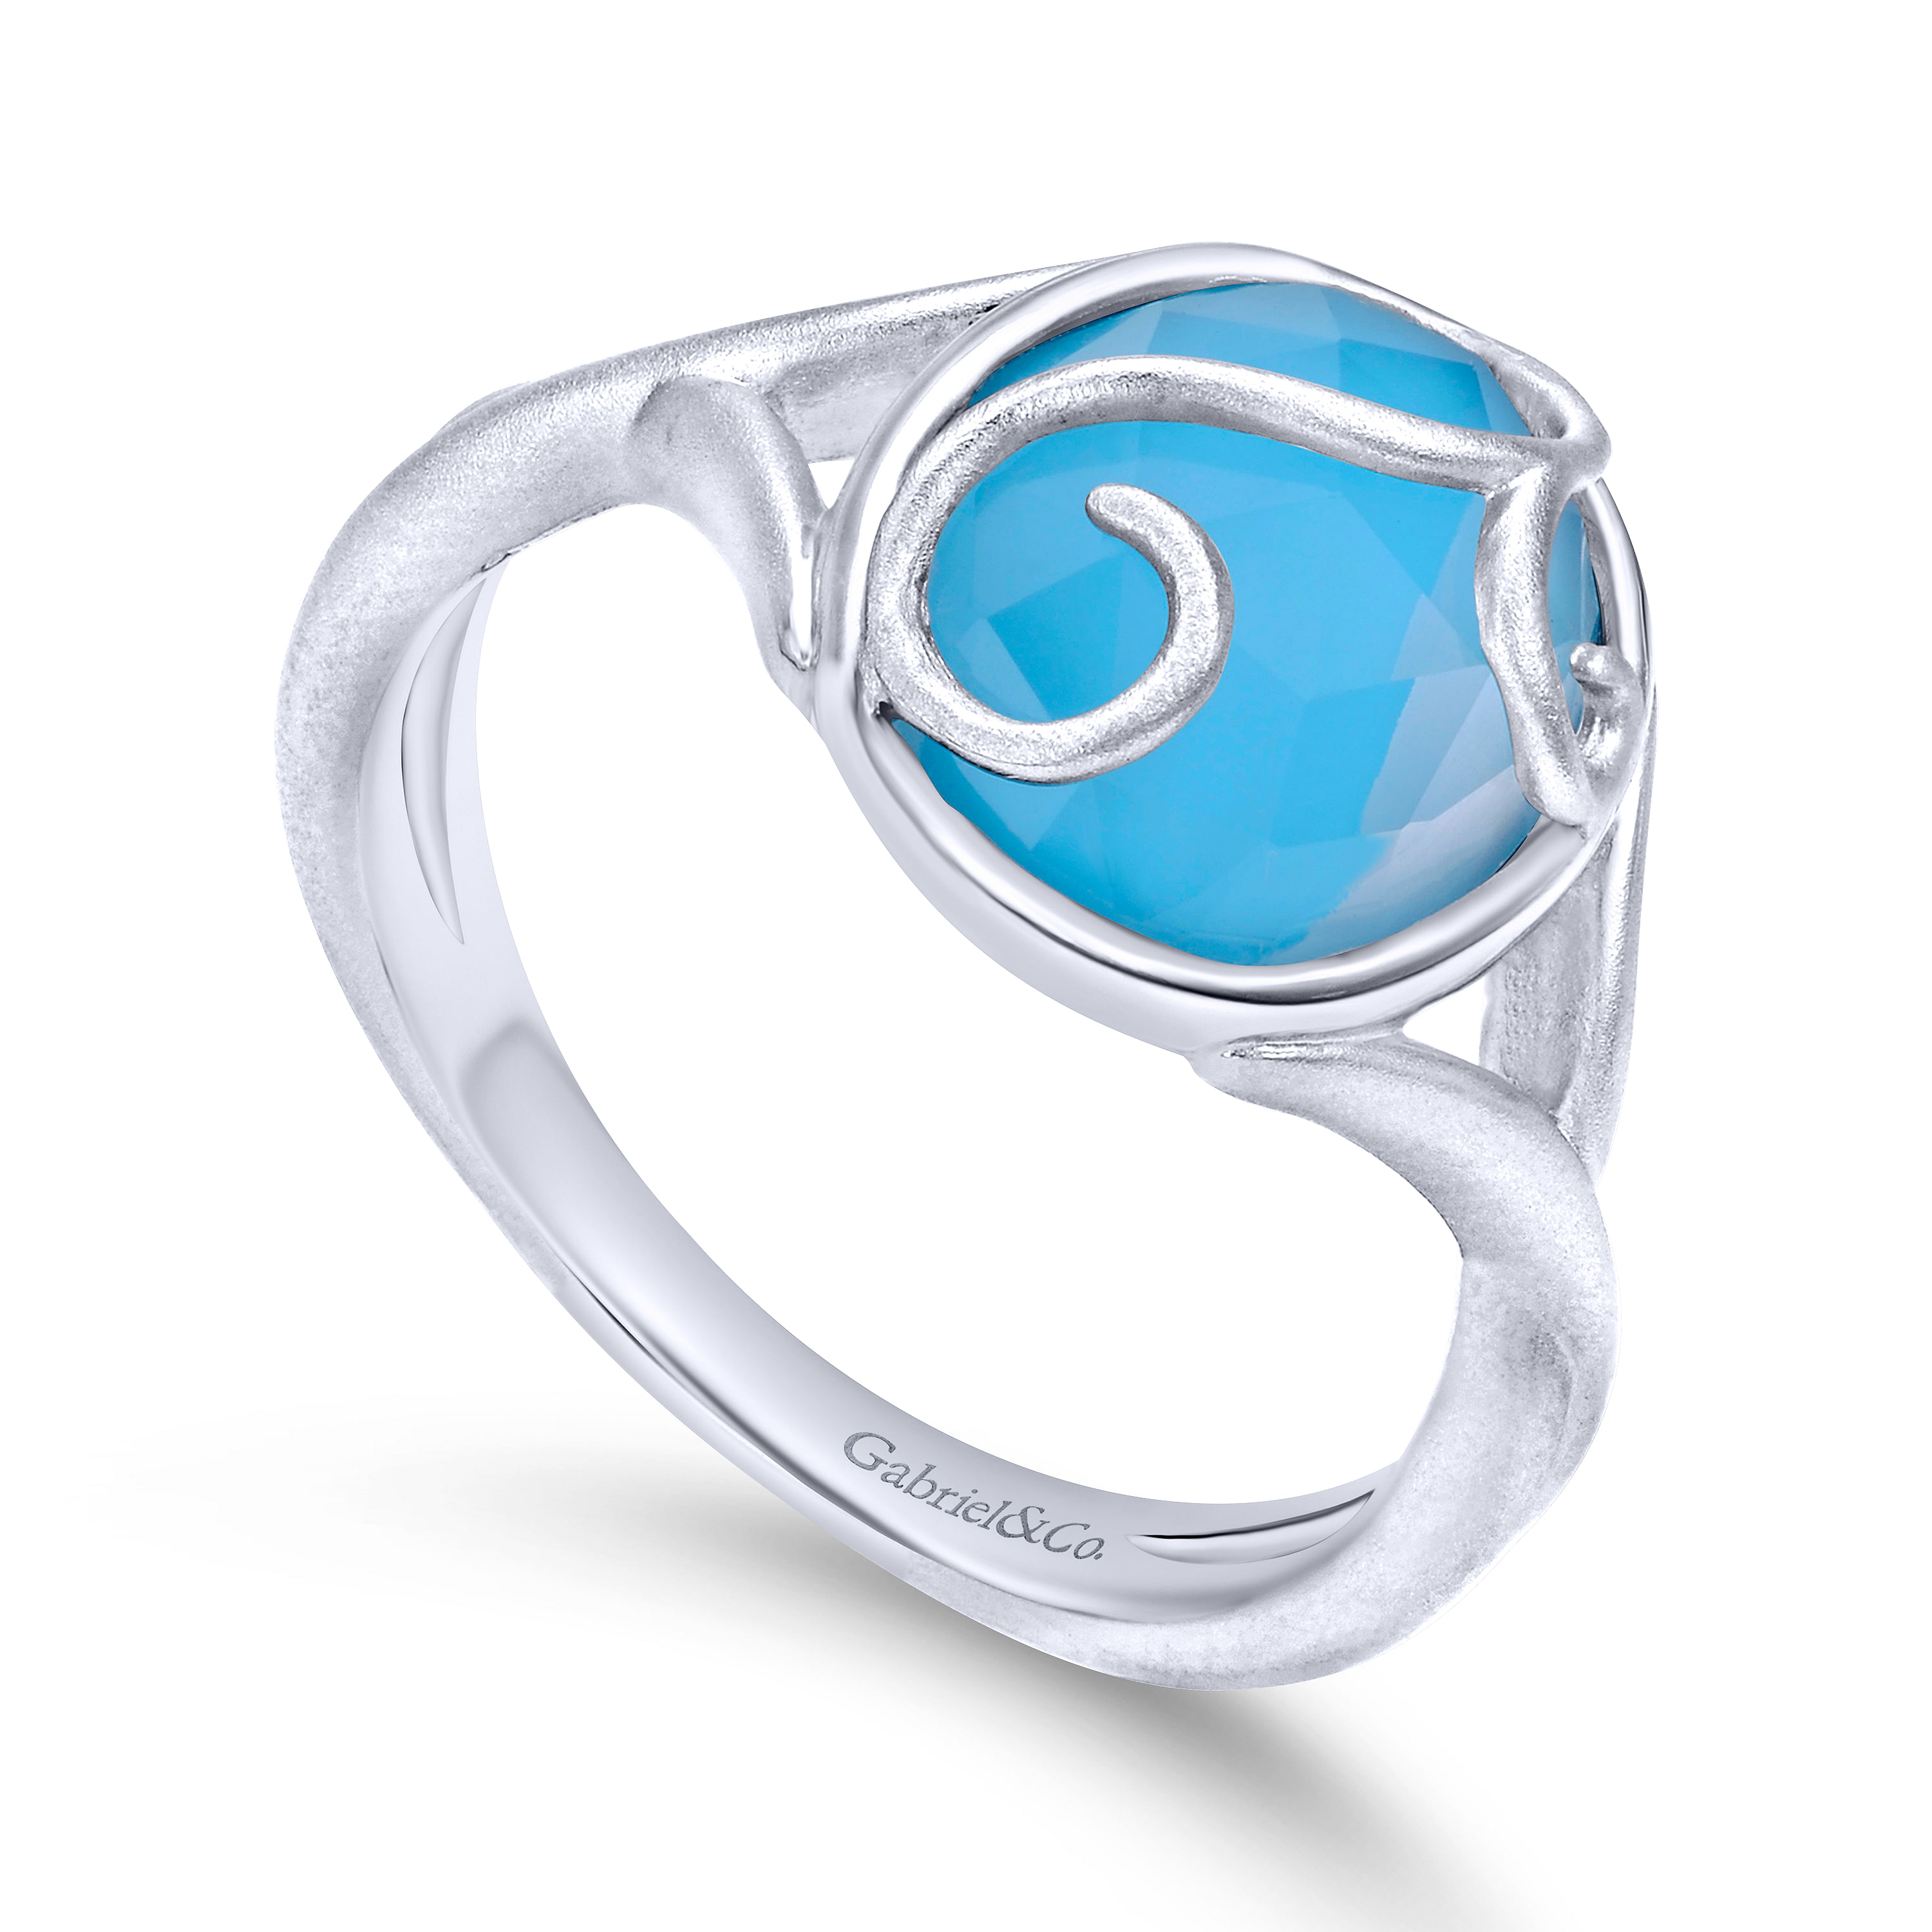 925 Sterling Silver Oval Rock Crystal/Turquoise Swirl Ring